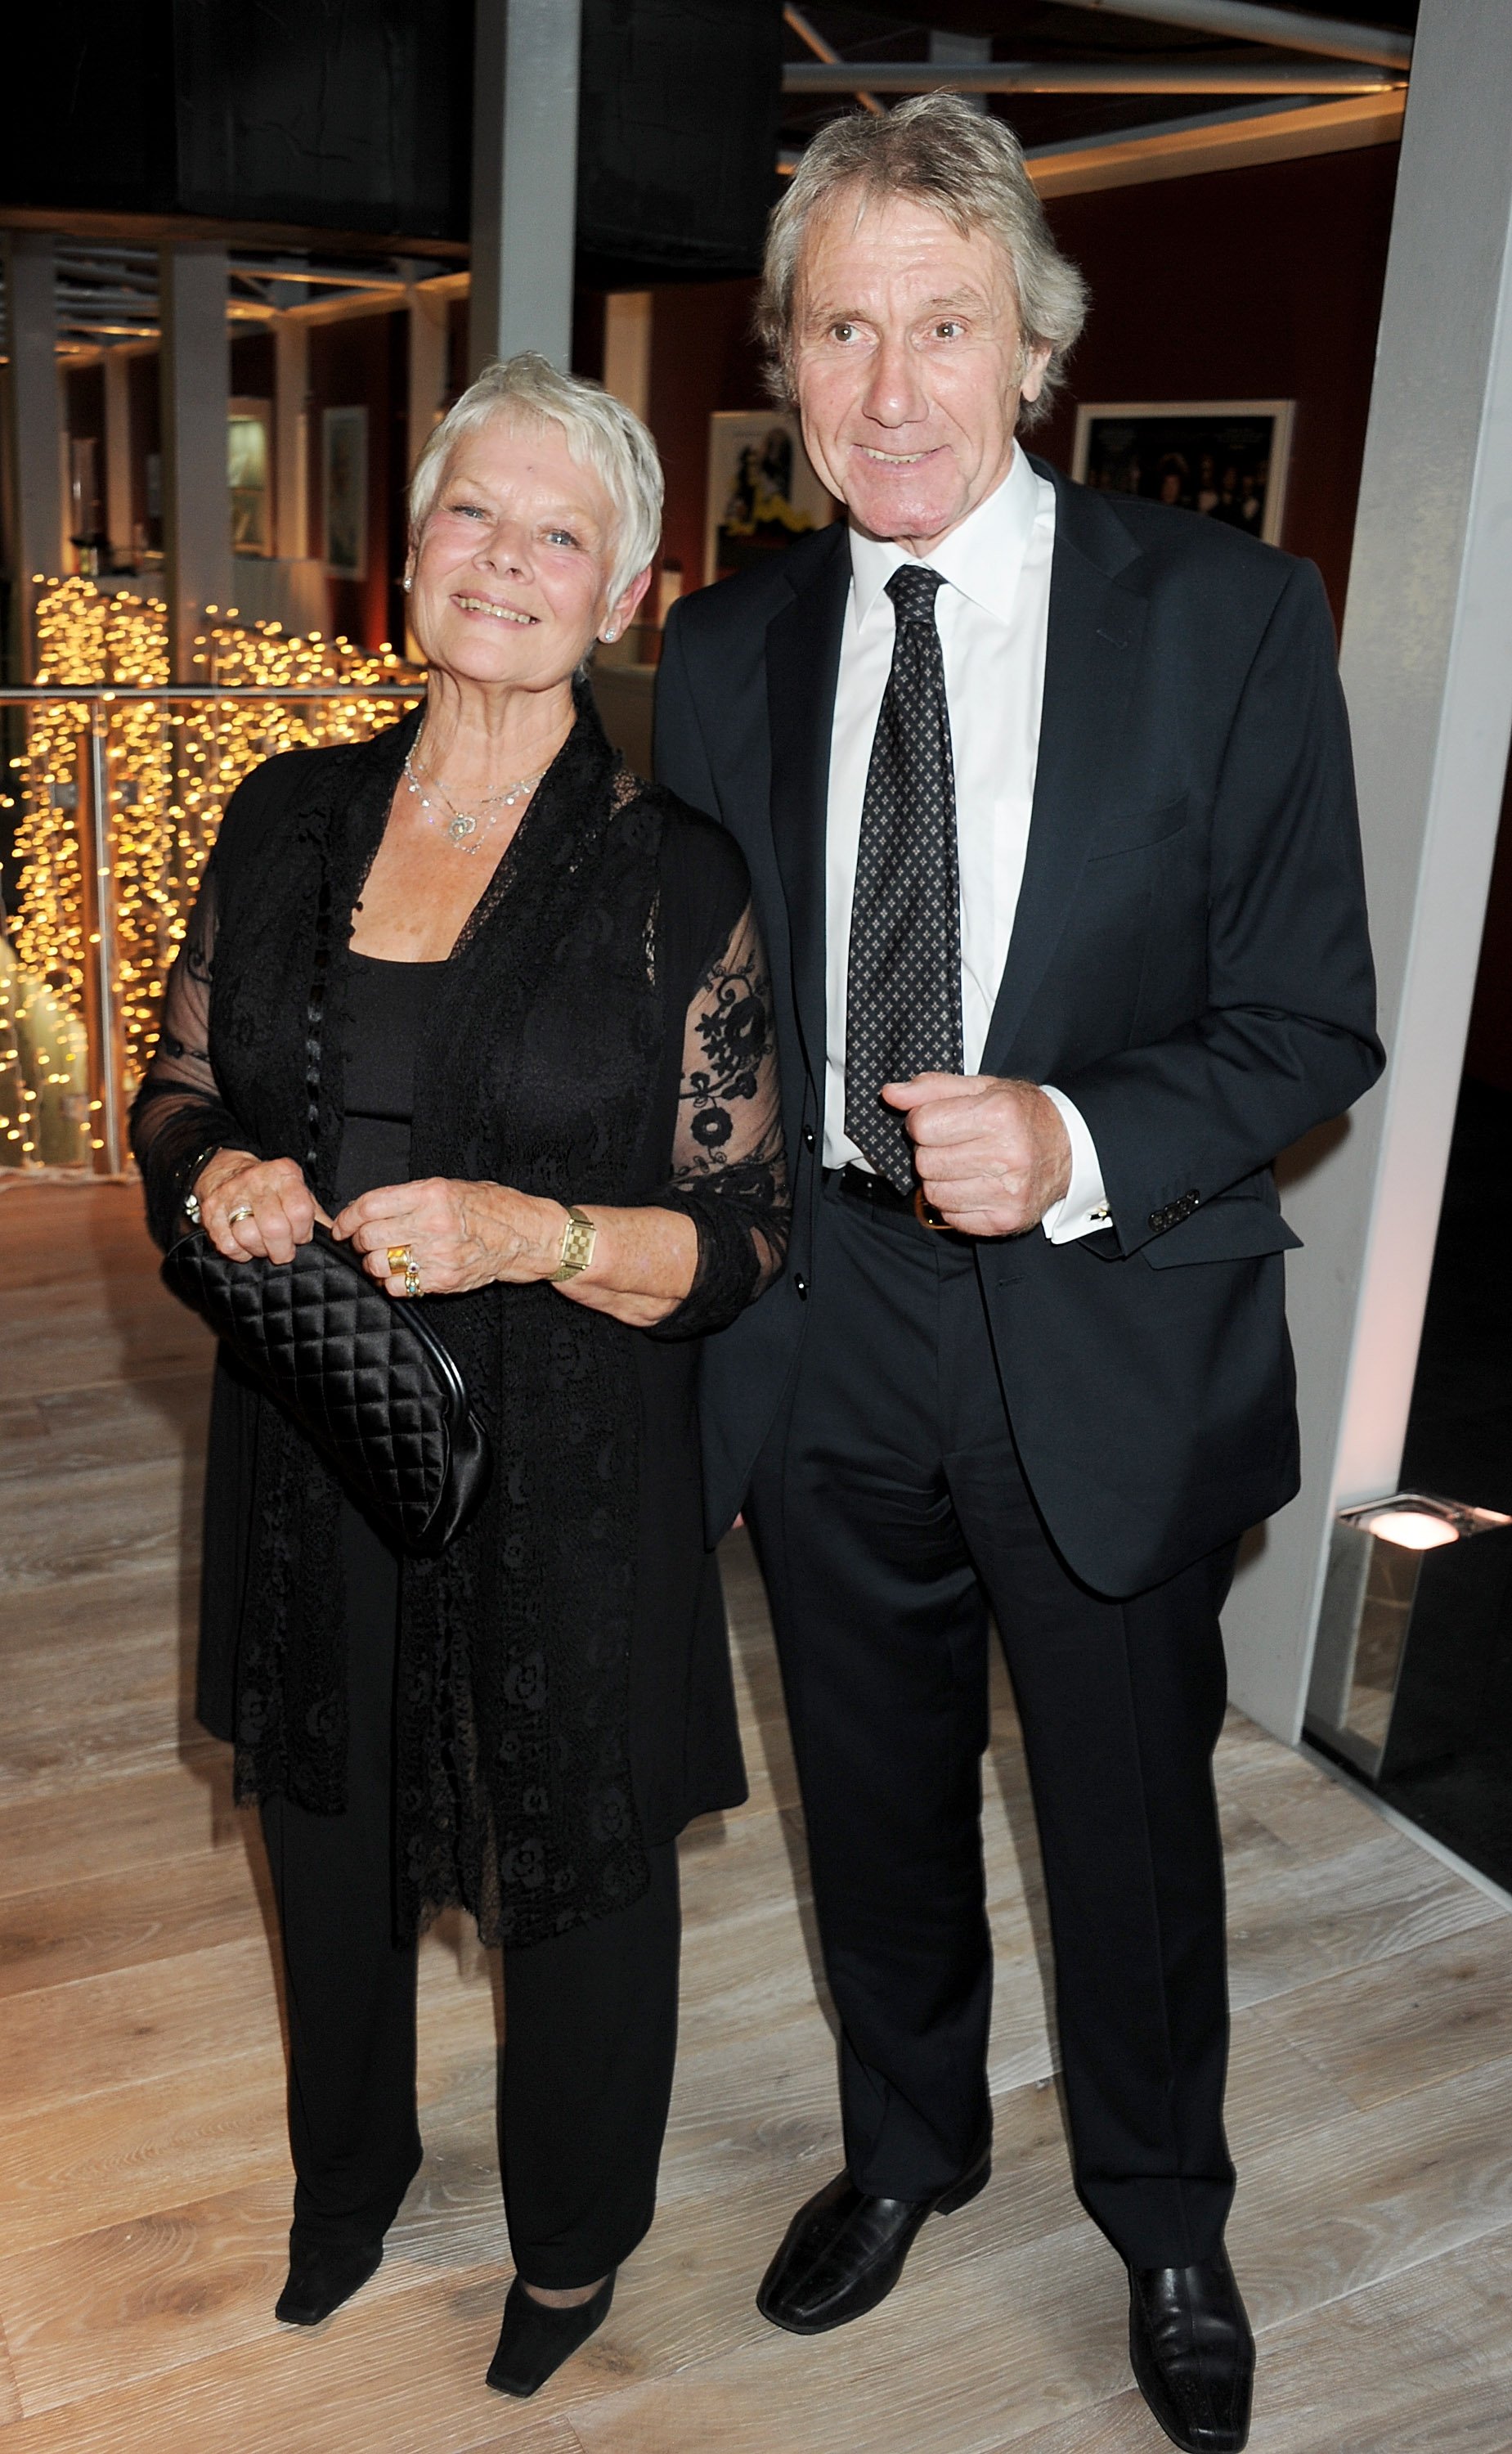 Judi Dench and David Mills attend the BFI Chairman's Dinner at BFI Southbank on June 22, 2011 in London, England ┃Source: Getty Images